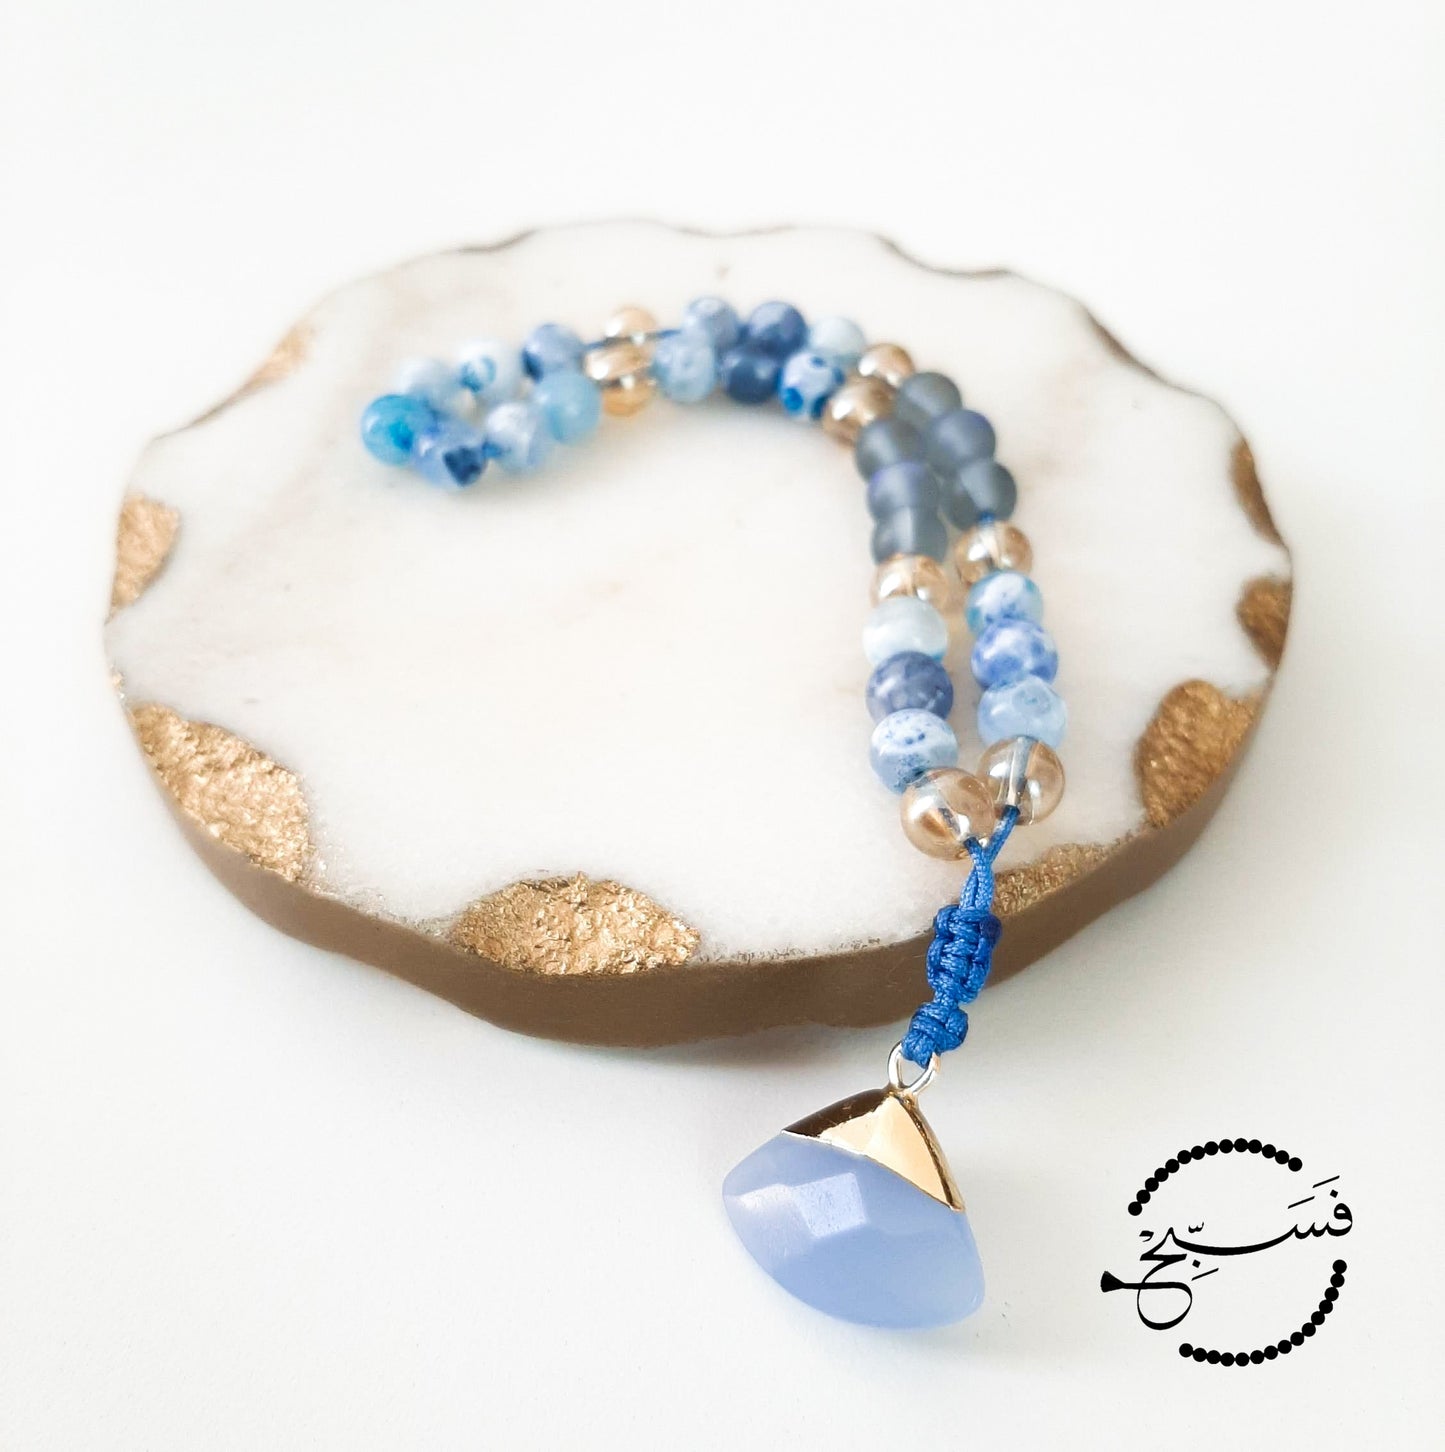 Blue fire agate and moonstone beads, with a pale blue quartz pendant.  Features an adjustable knot.  33 beads (6mm beads)